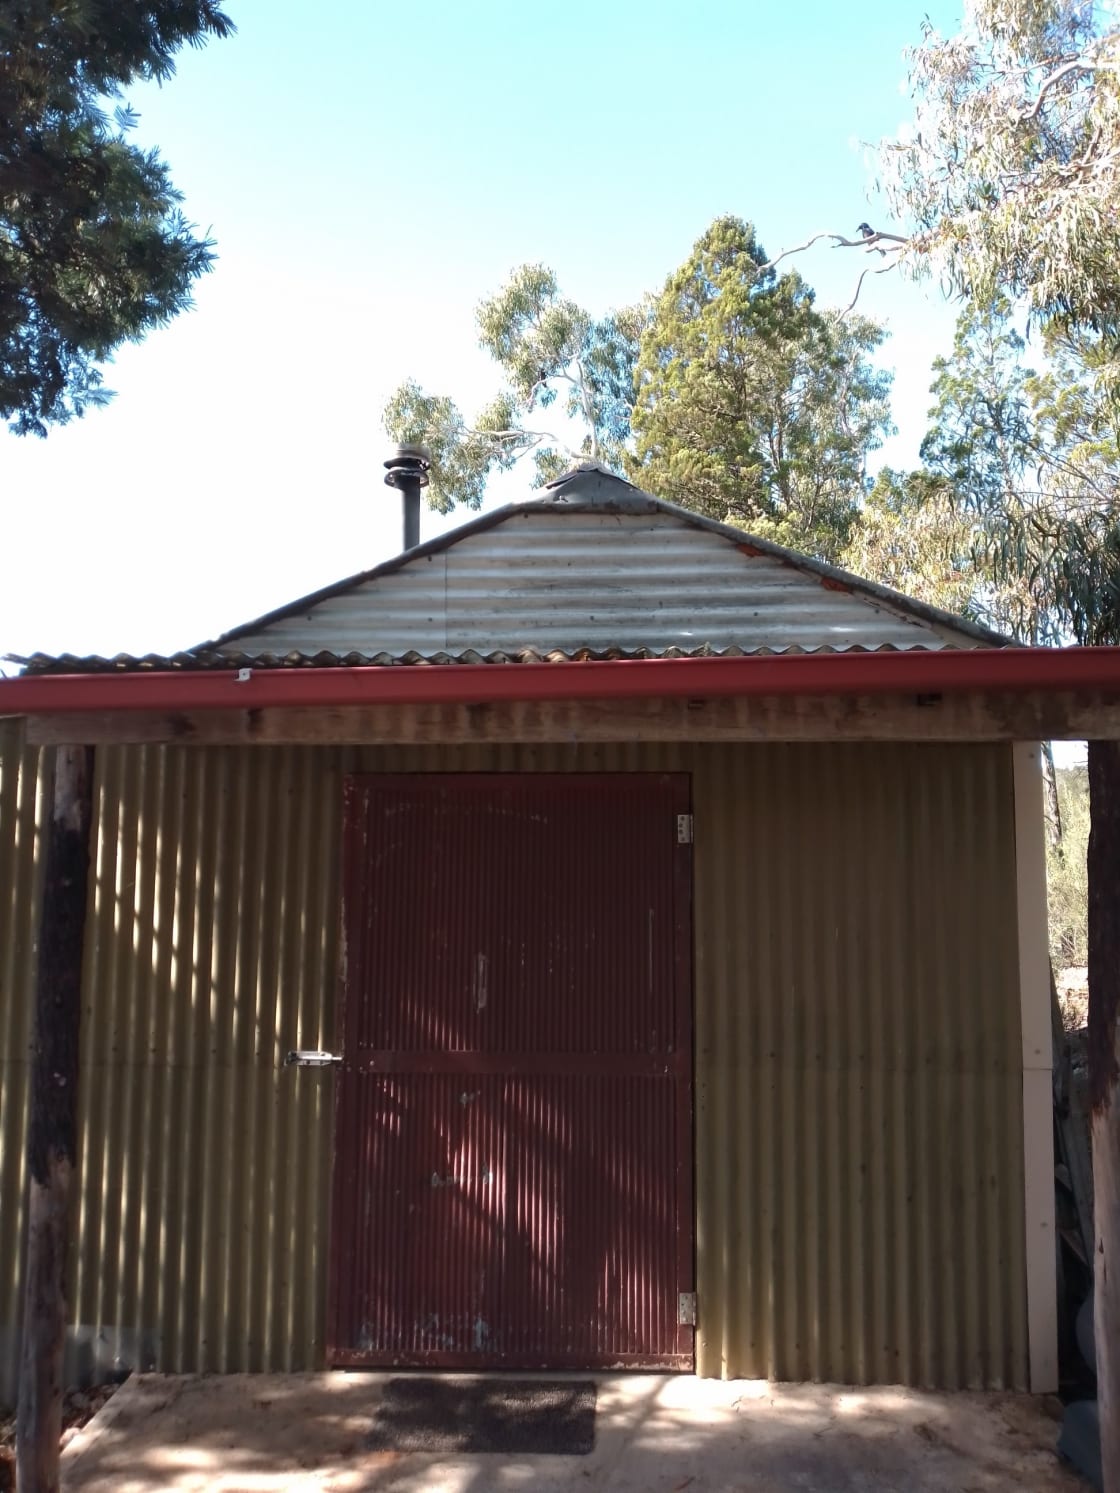 The Binjura Bush Huts like the ones used by the early cattleman up in the mountains.
